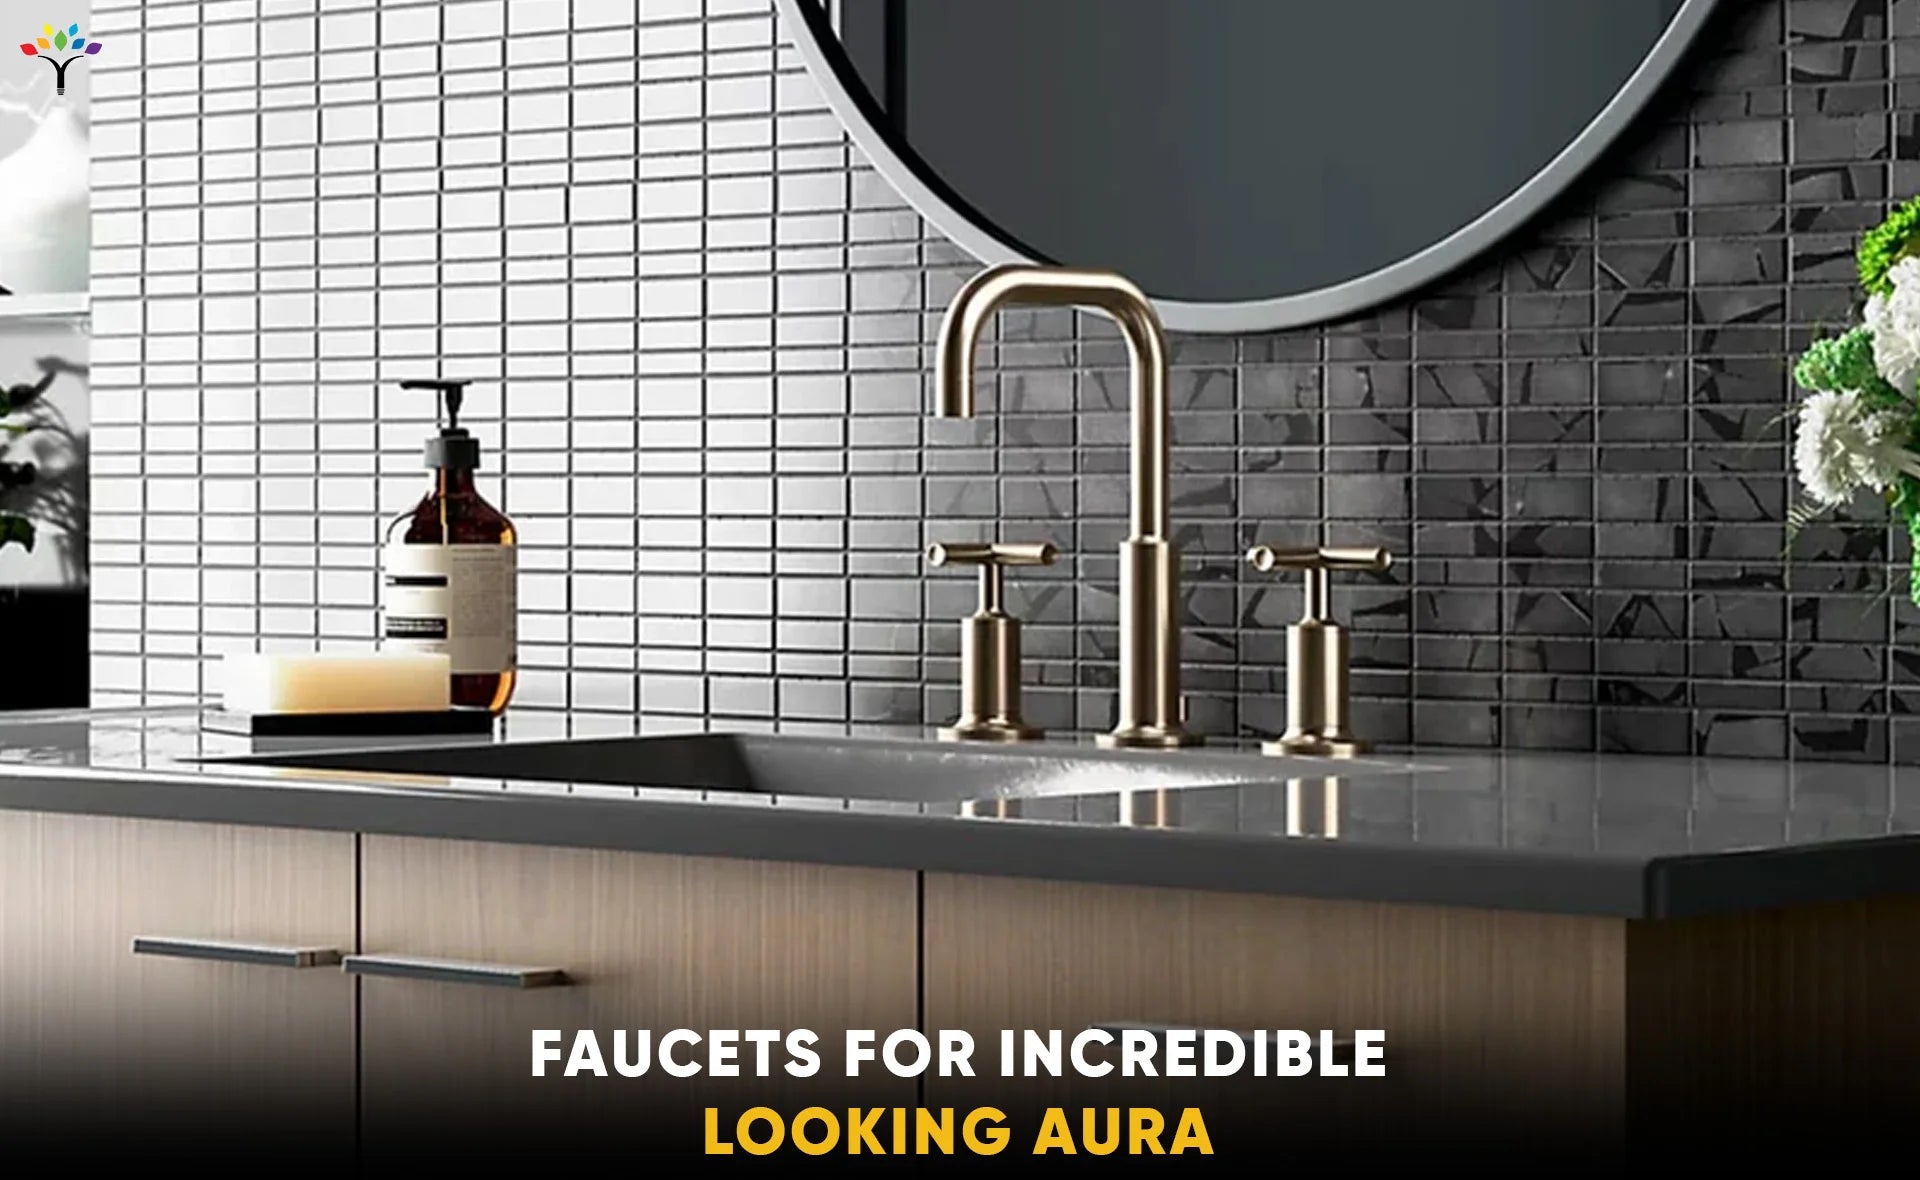 Faucets For Incredible Looking Aura